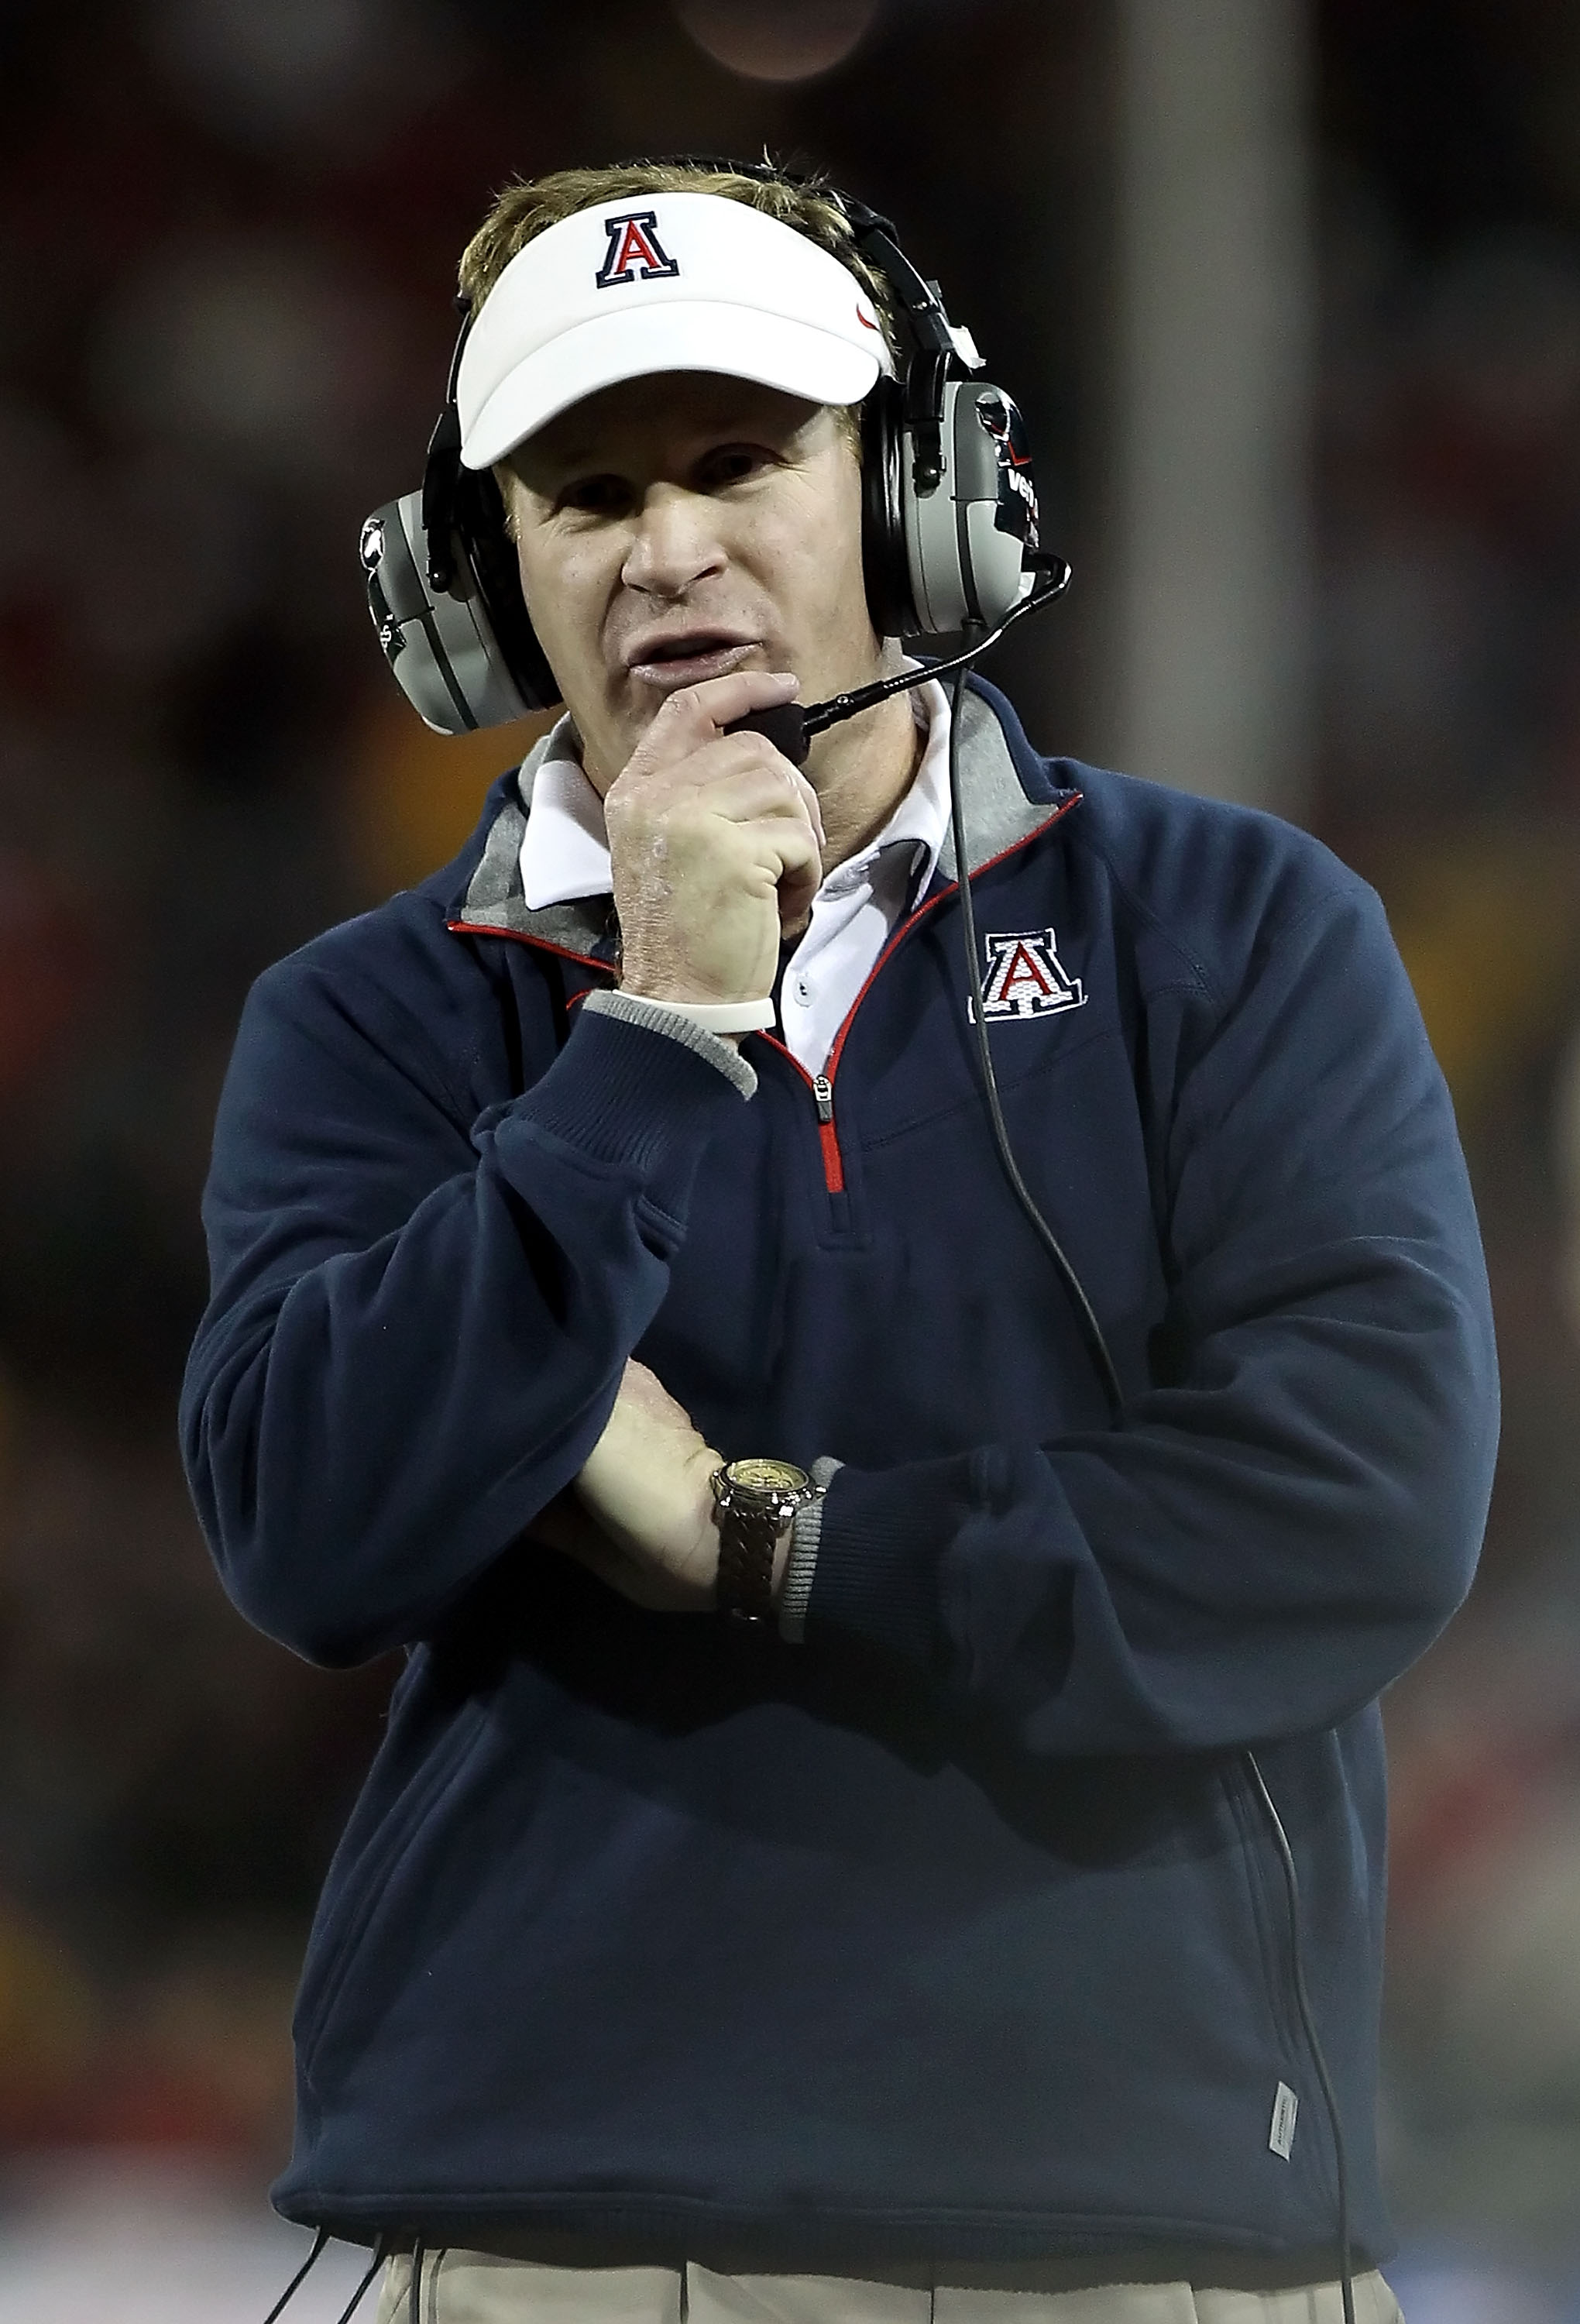 TUCSON, AZ - DECEMBER 02:  Head coach Mike Stoops of the Arizona Wildcats during the college football game against the Arizona State Sun Devils at Arizona Stadium on December 2, 2010 in Tucson, Arizona. The Sun Devils defeated the Wildcats 30-29 in double